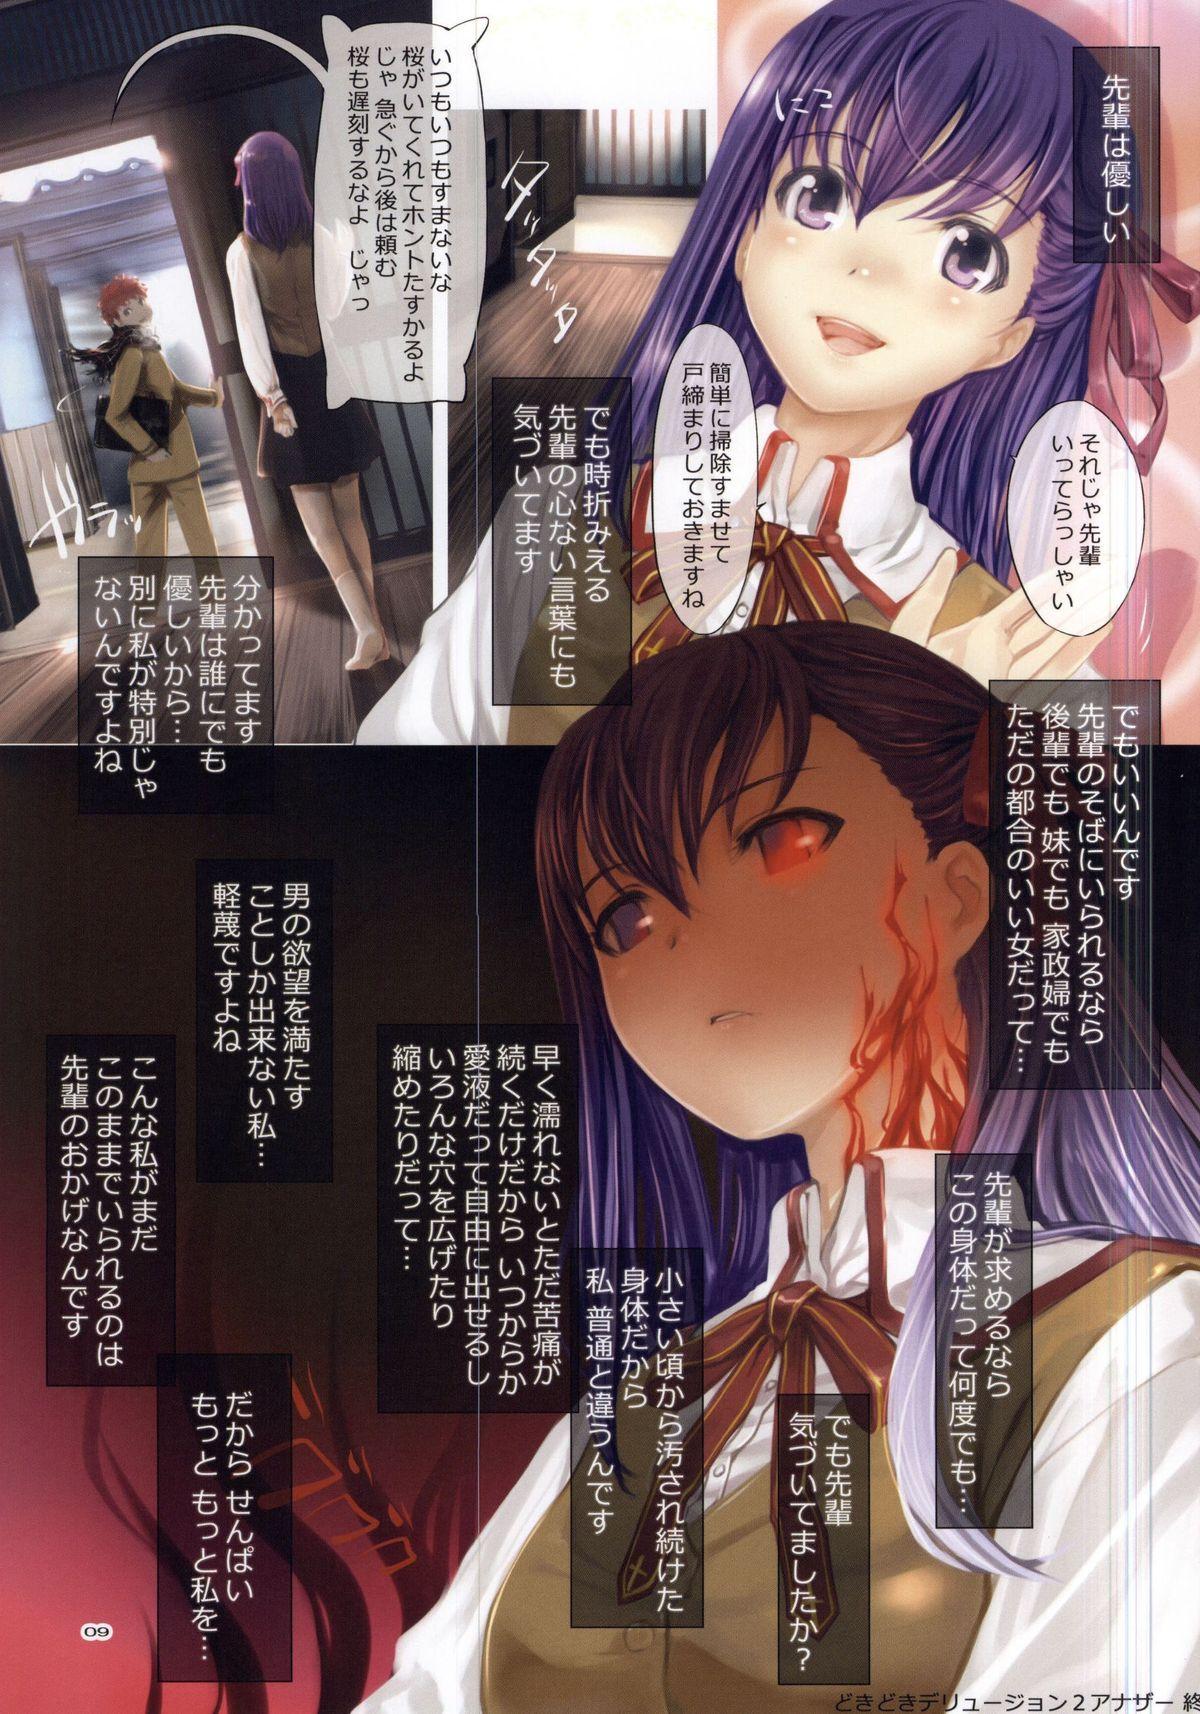 Family Taboo tremolo - Fate stay night Jerk Off Instruction - Page 8